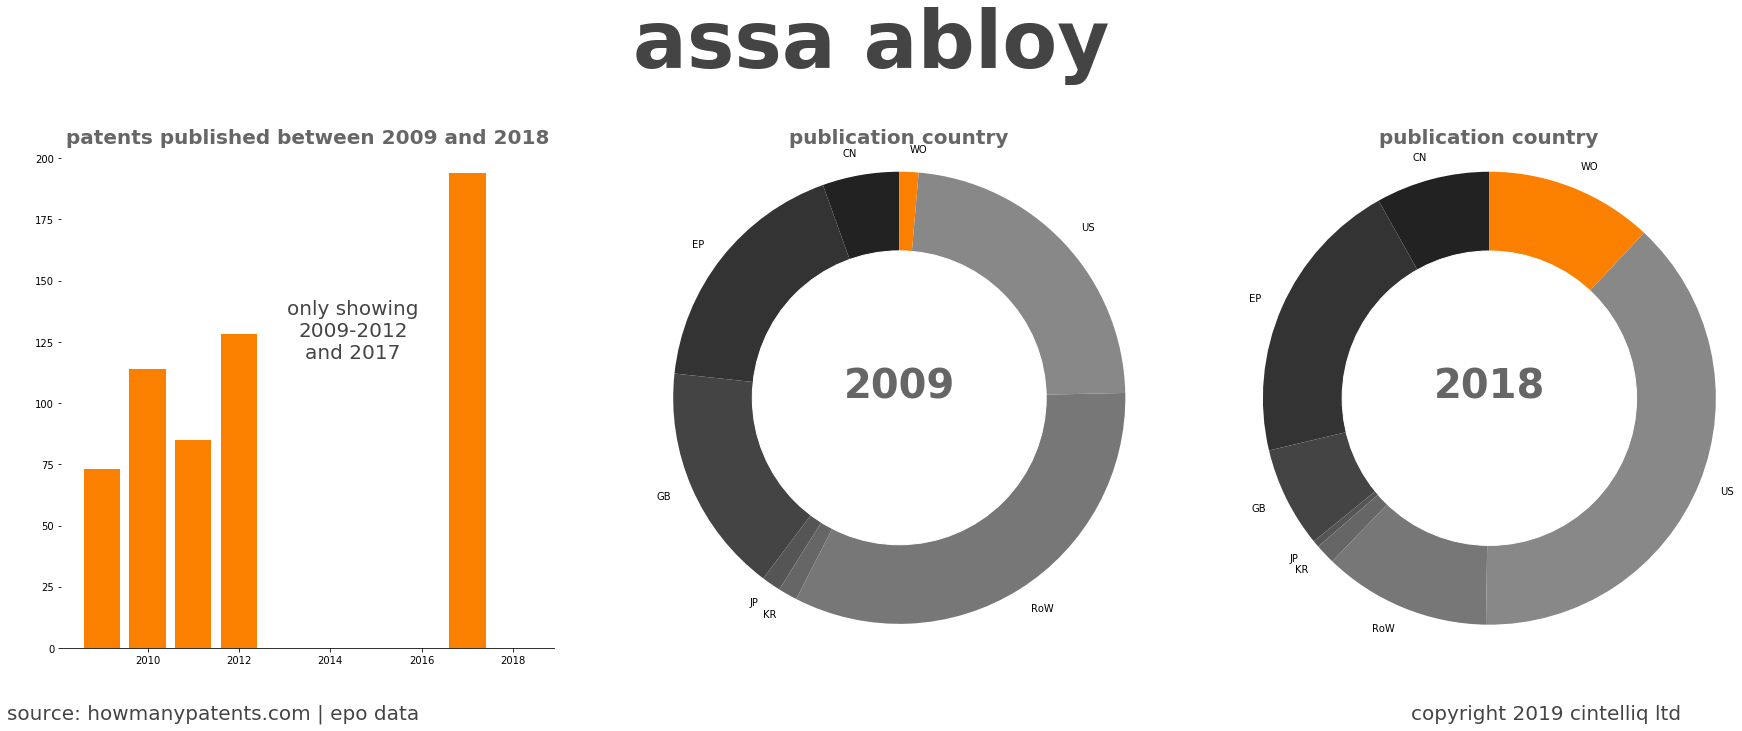 summary of patents for Assa Abloy